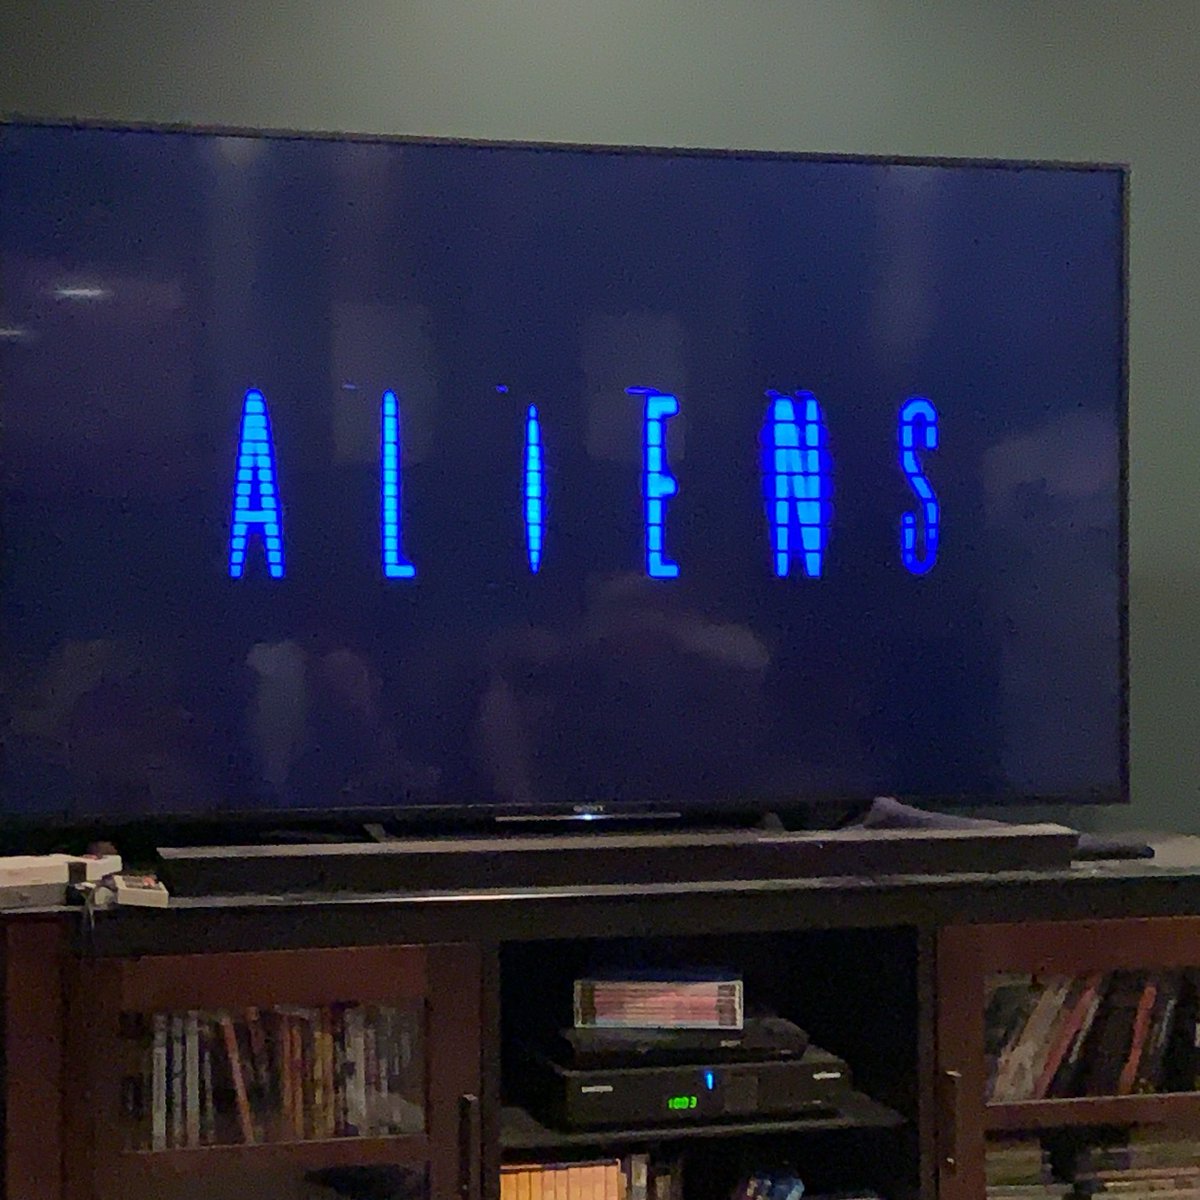 Ok, popping on  #Aliens which has always been my favorite of the series on previous views. I MAY cut my viewing short because this thing is long.